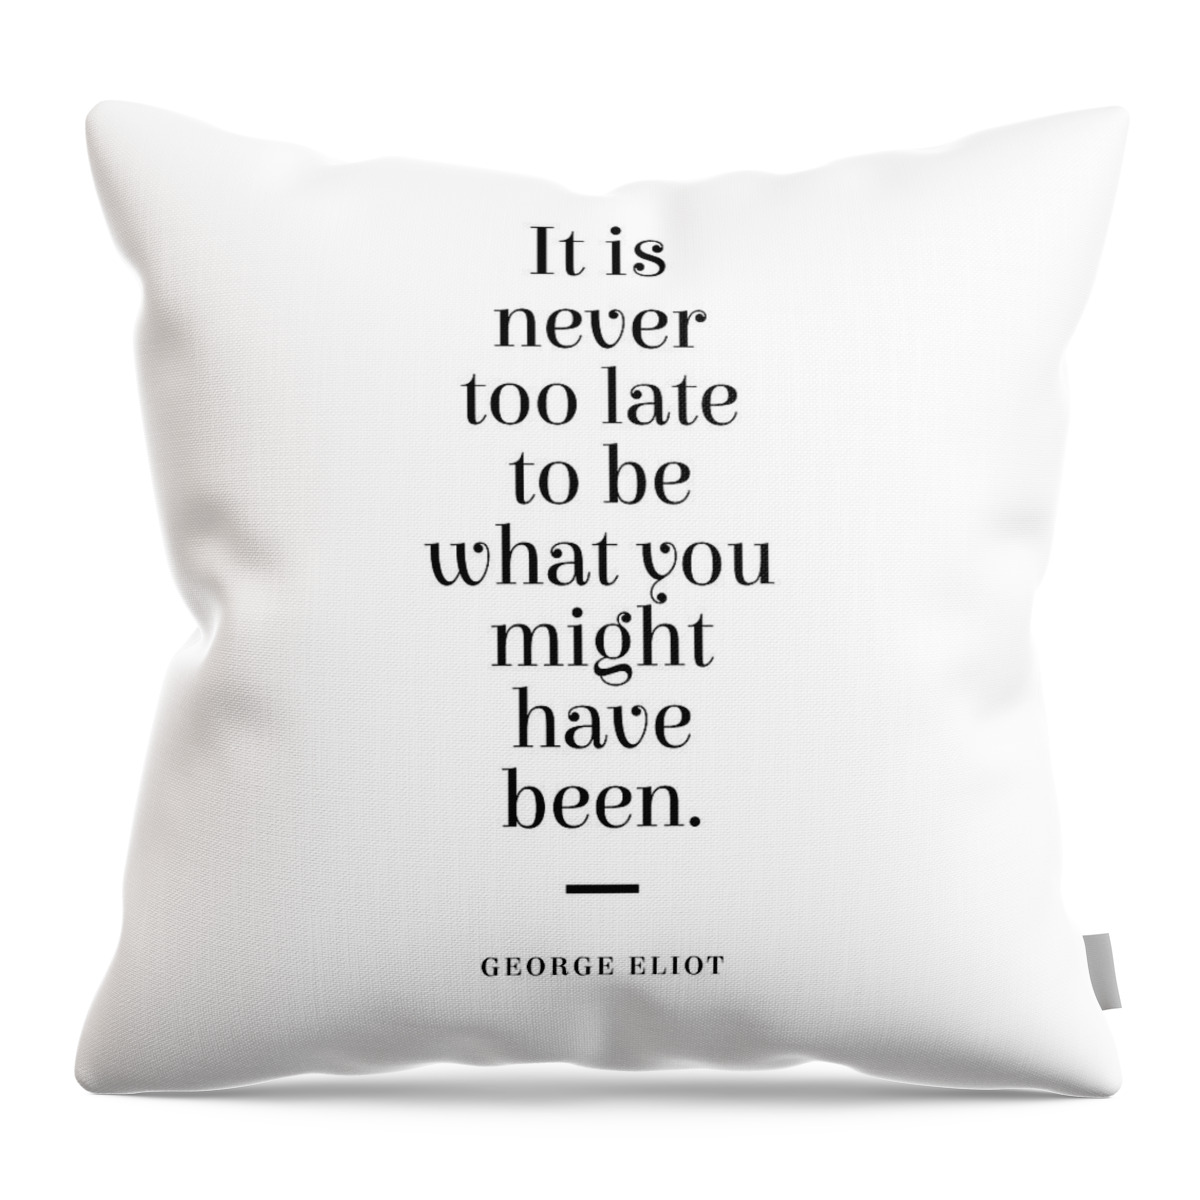 George Eliot Throw Pillow featuring the digital art George Eliot Quote - Mary Ann Evans - Never too late 1 - Minimal, Typography Print - Literature by Studio Grafiikka